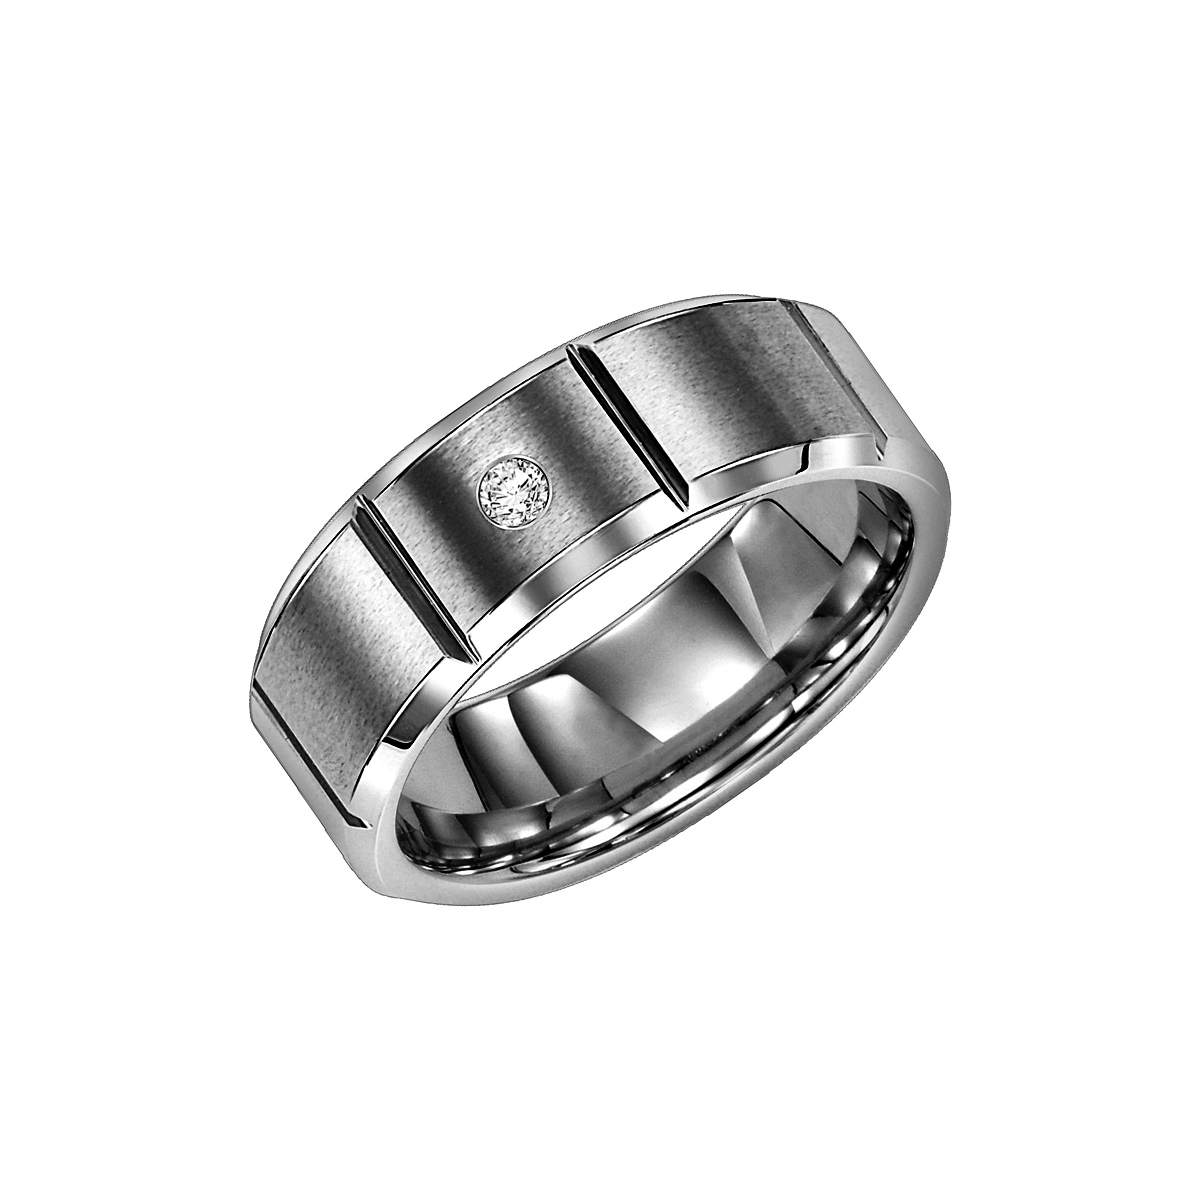 Titanium Black Plated 8mm RING BAND with Matte Finished Accent size 10 